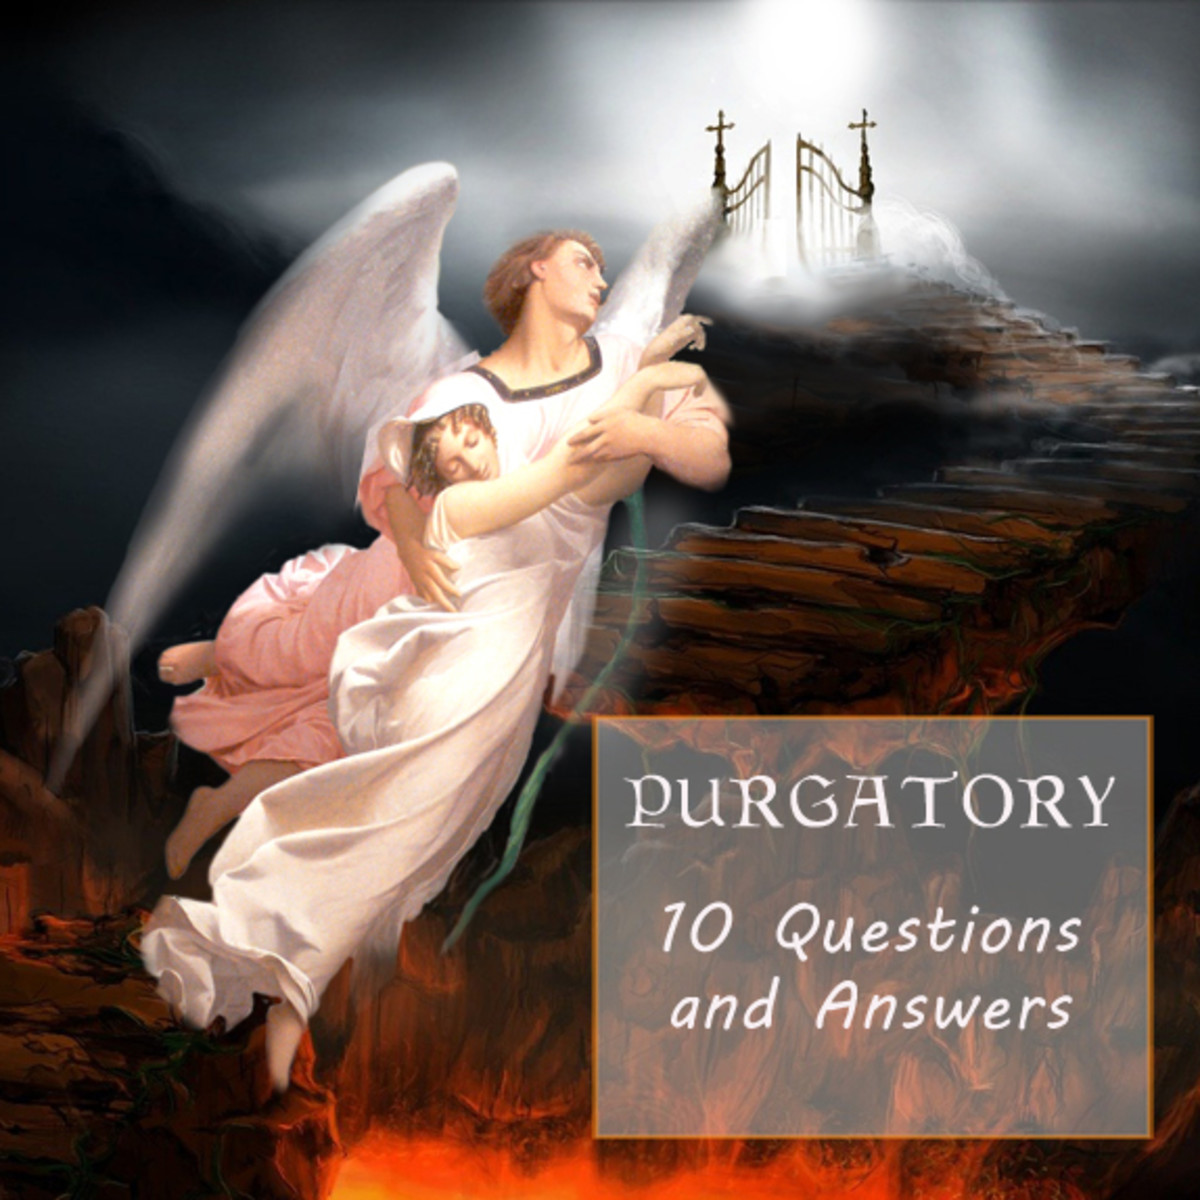 Purgatory: 10 Questions and Answers